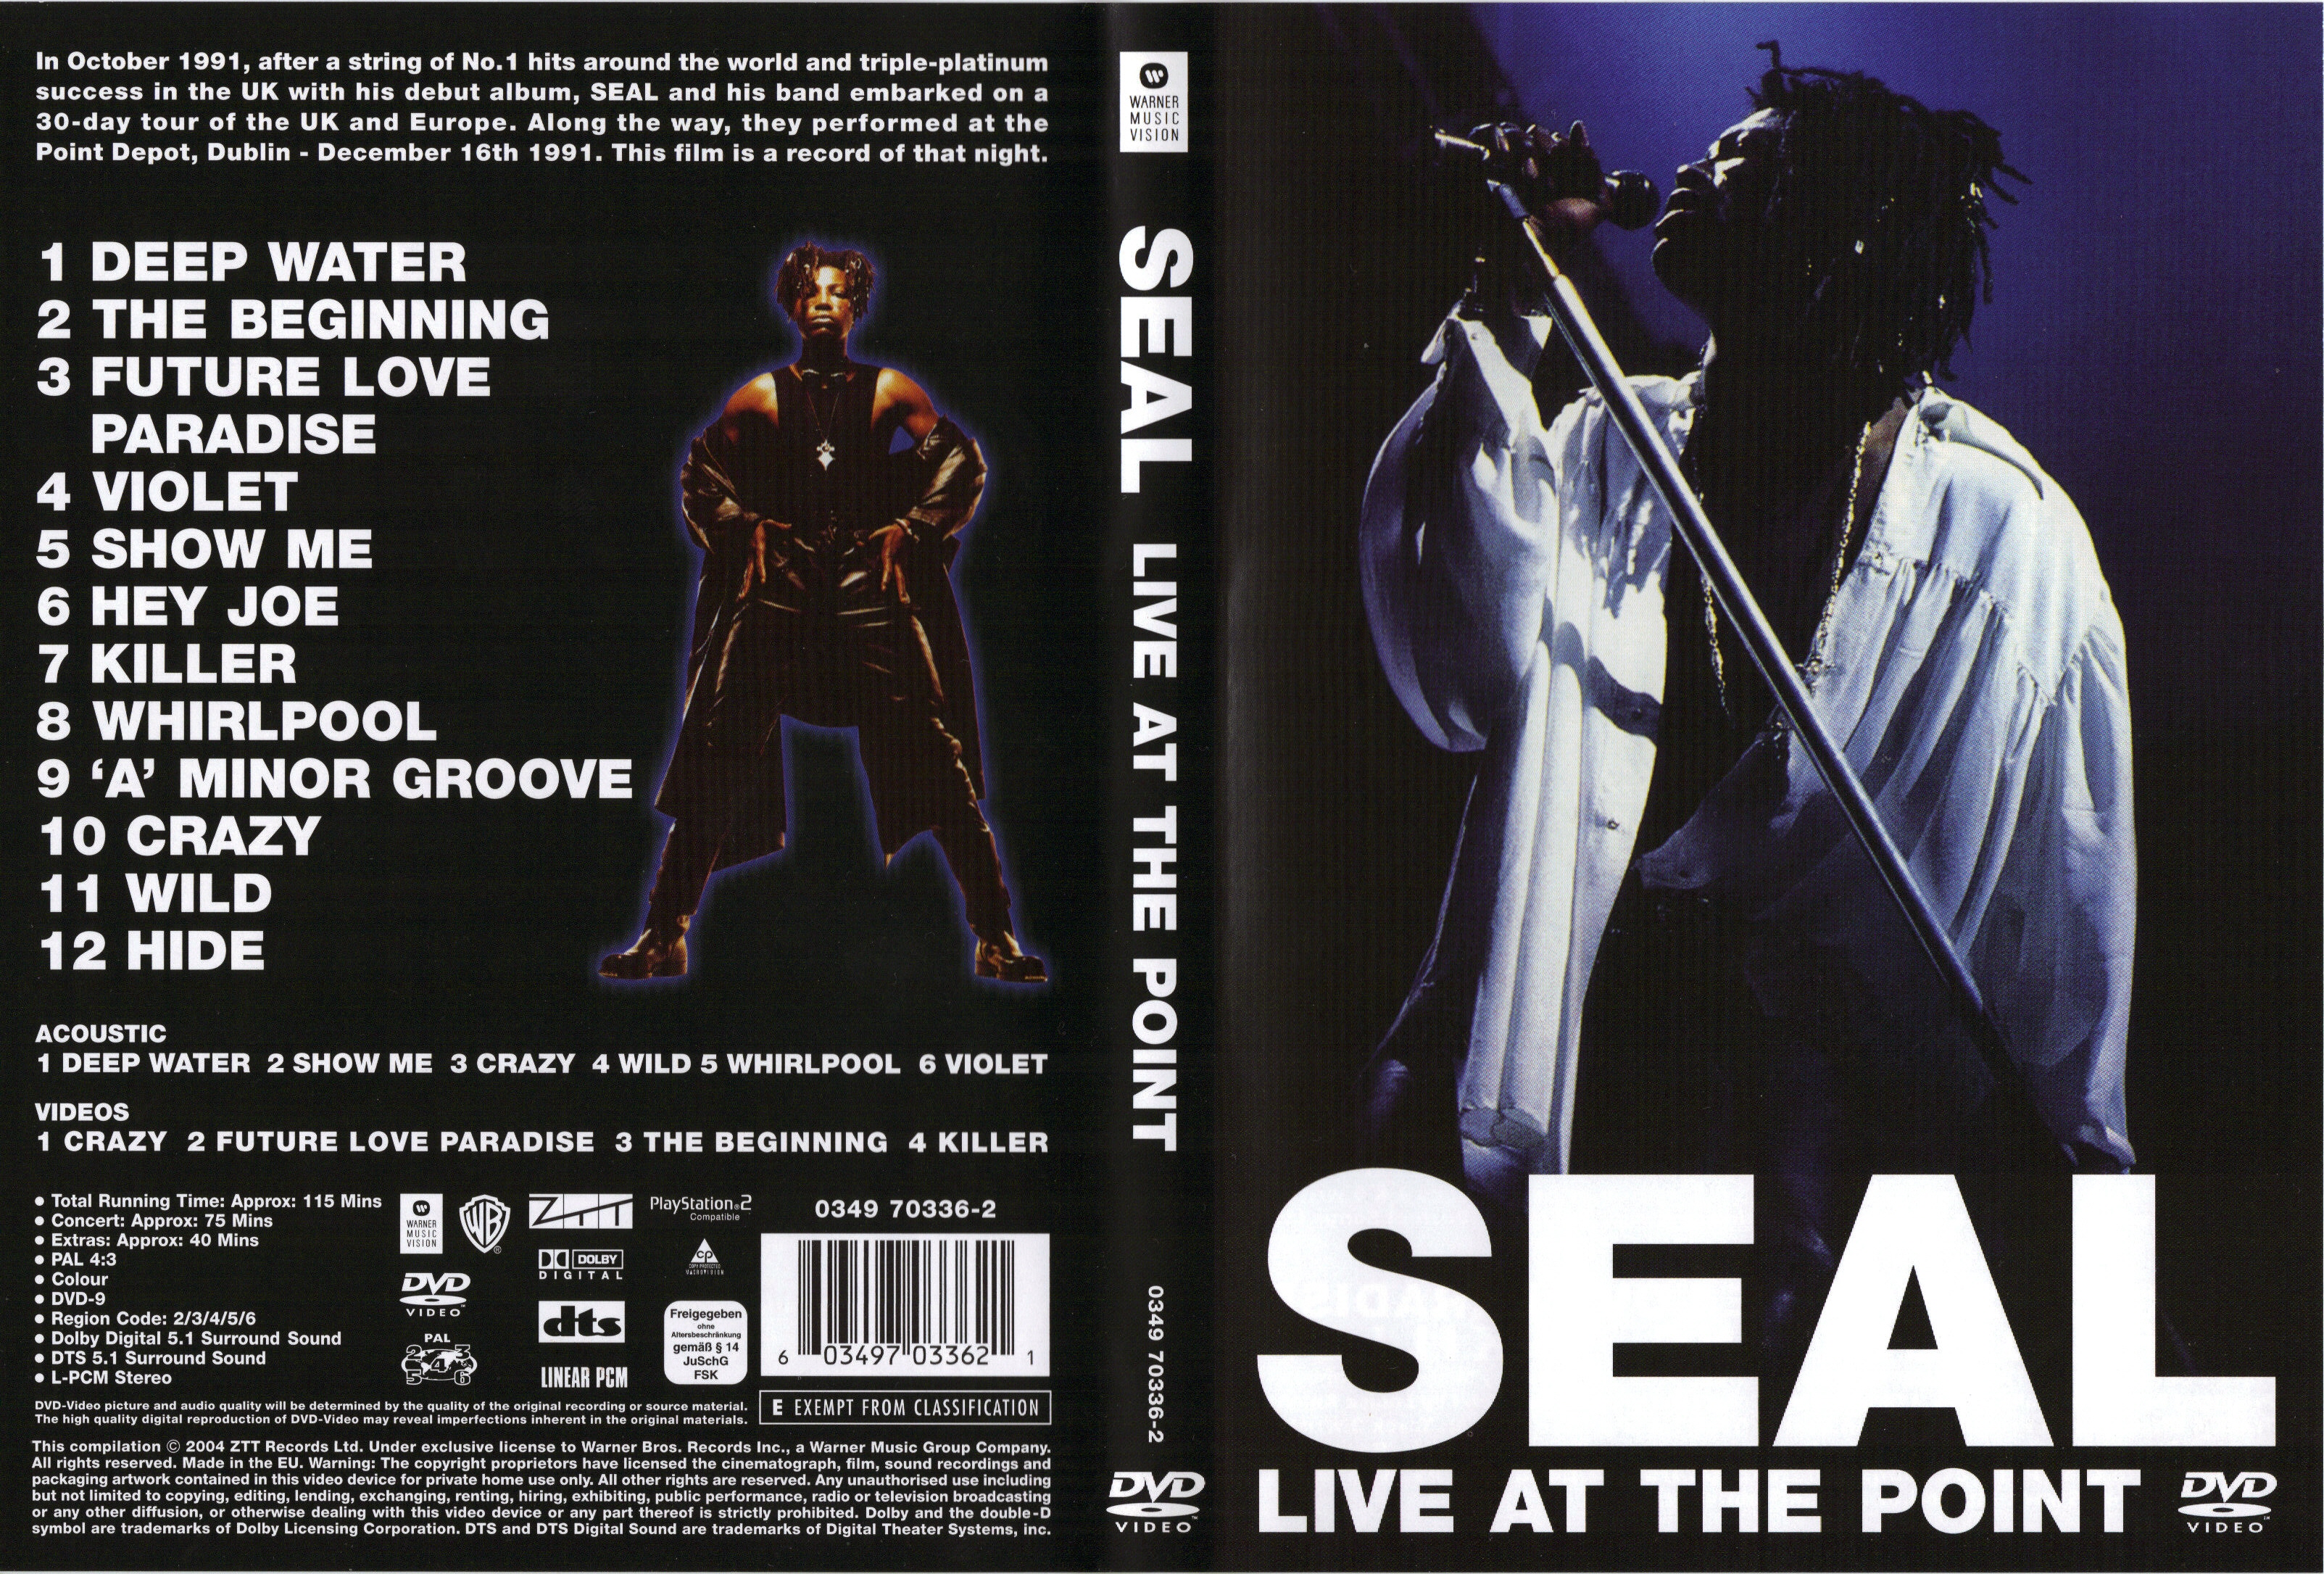 Jaquette DVD Seal live at the point